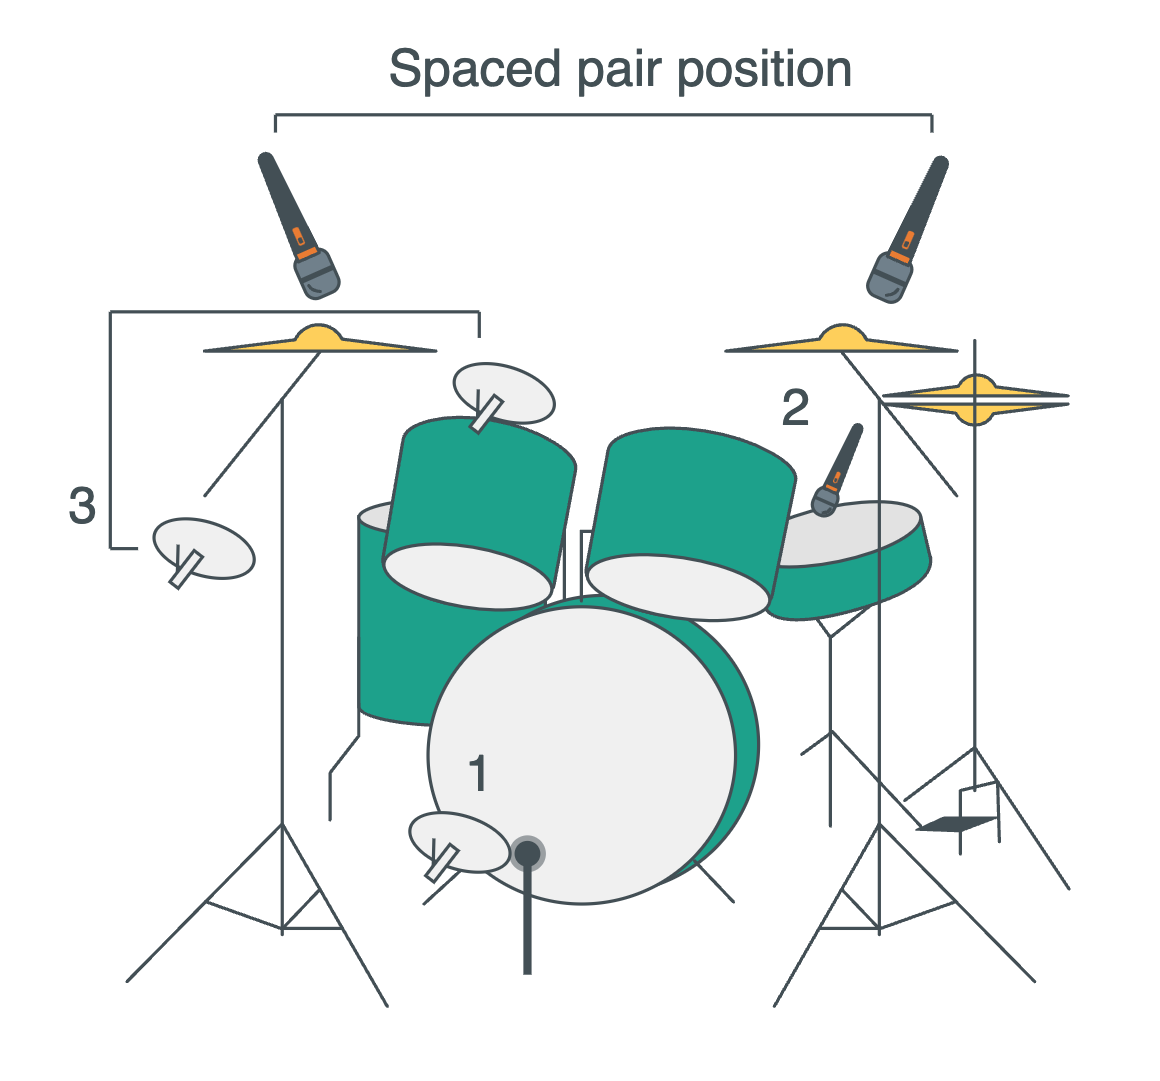 A diagram shows what the Spaced Pair Overhead Placement of microphones looks like.